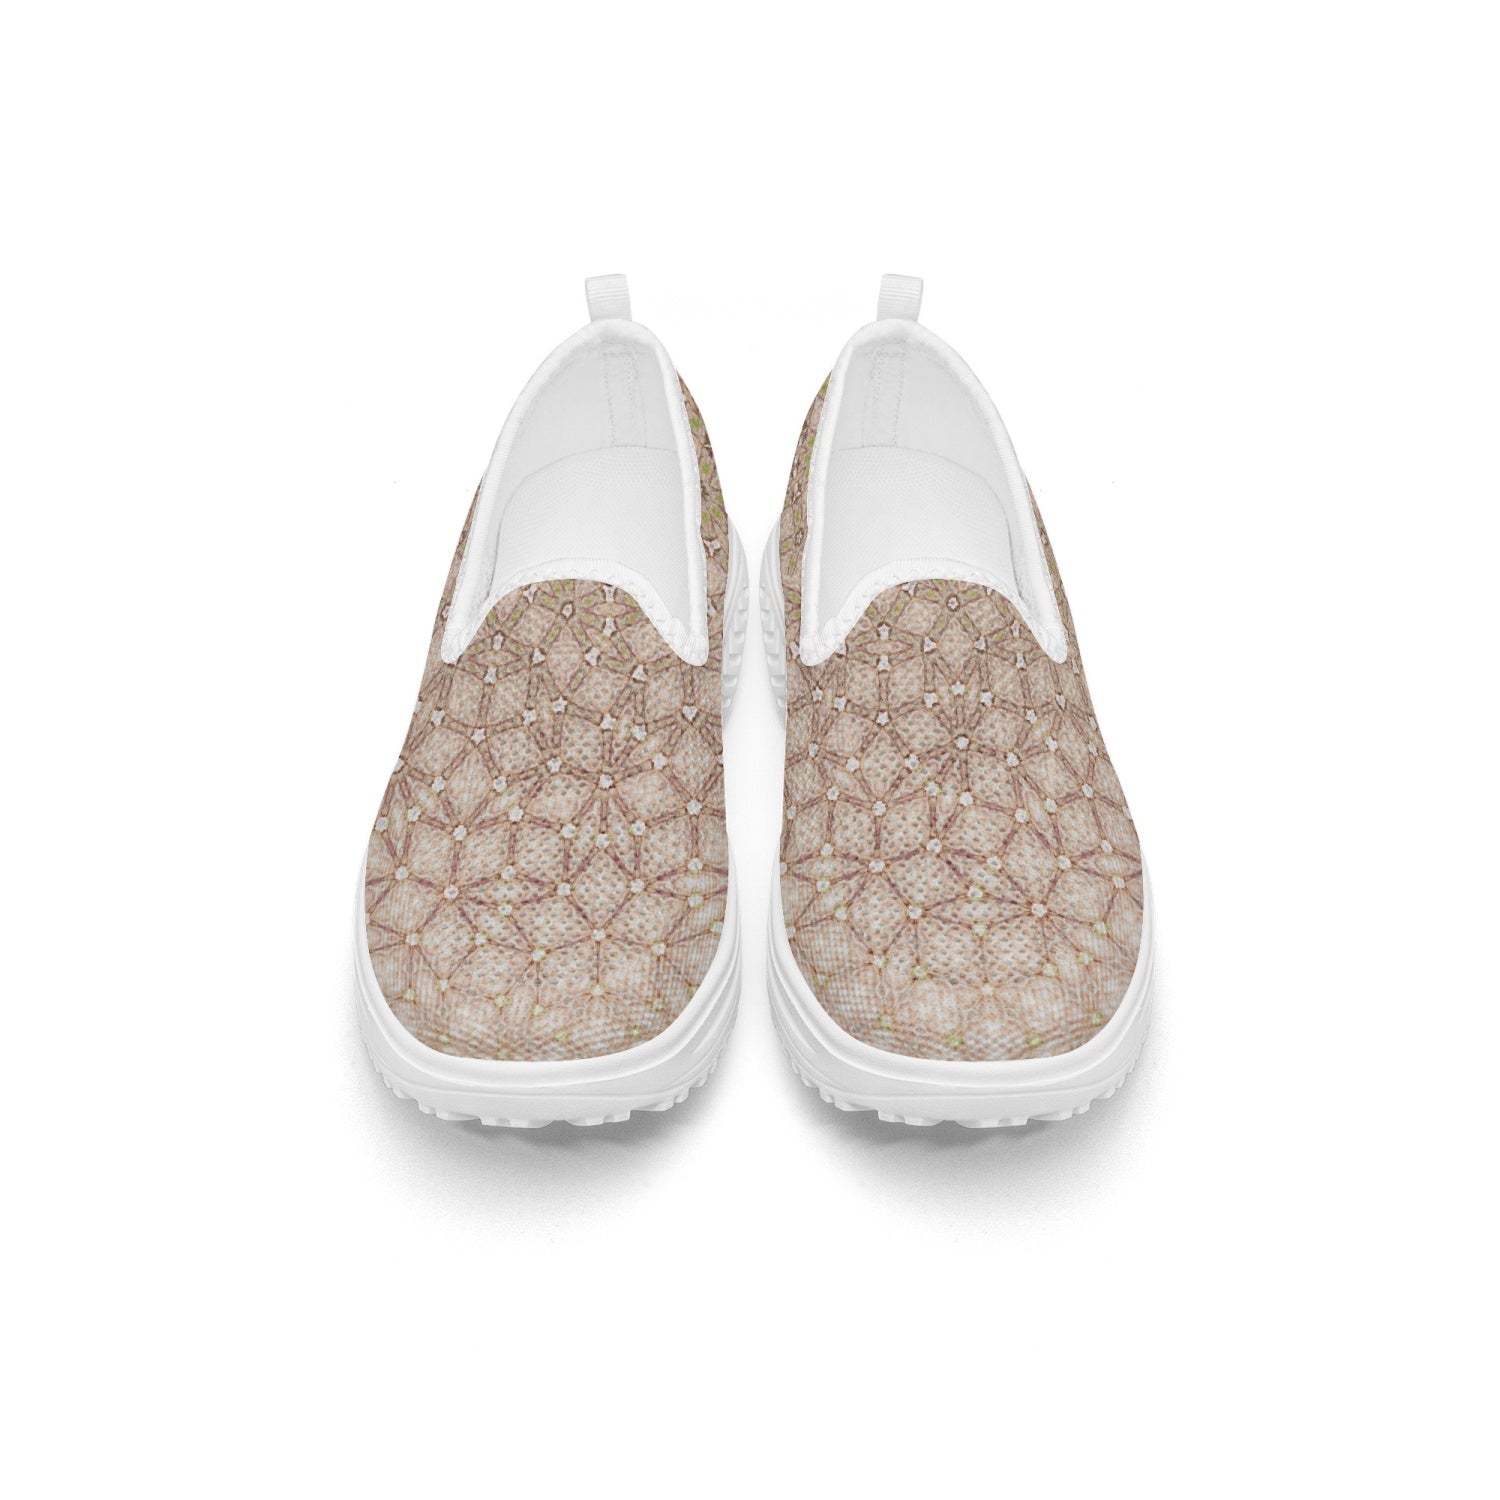 Delicate Pale Pink & Beige Rosy patterned Women's Slip-On Mesh Rocking Shoes, by Sensus Studio Design